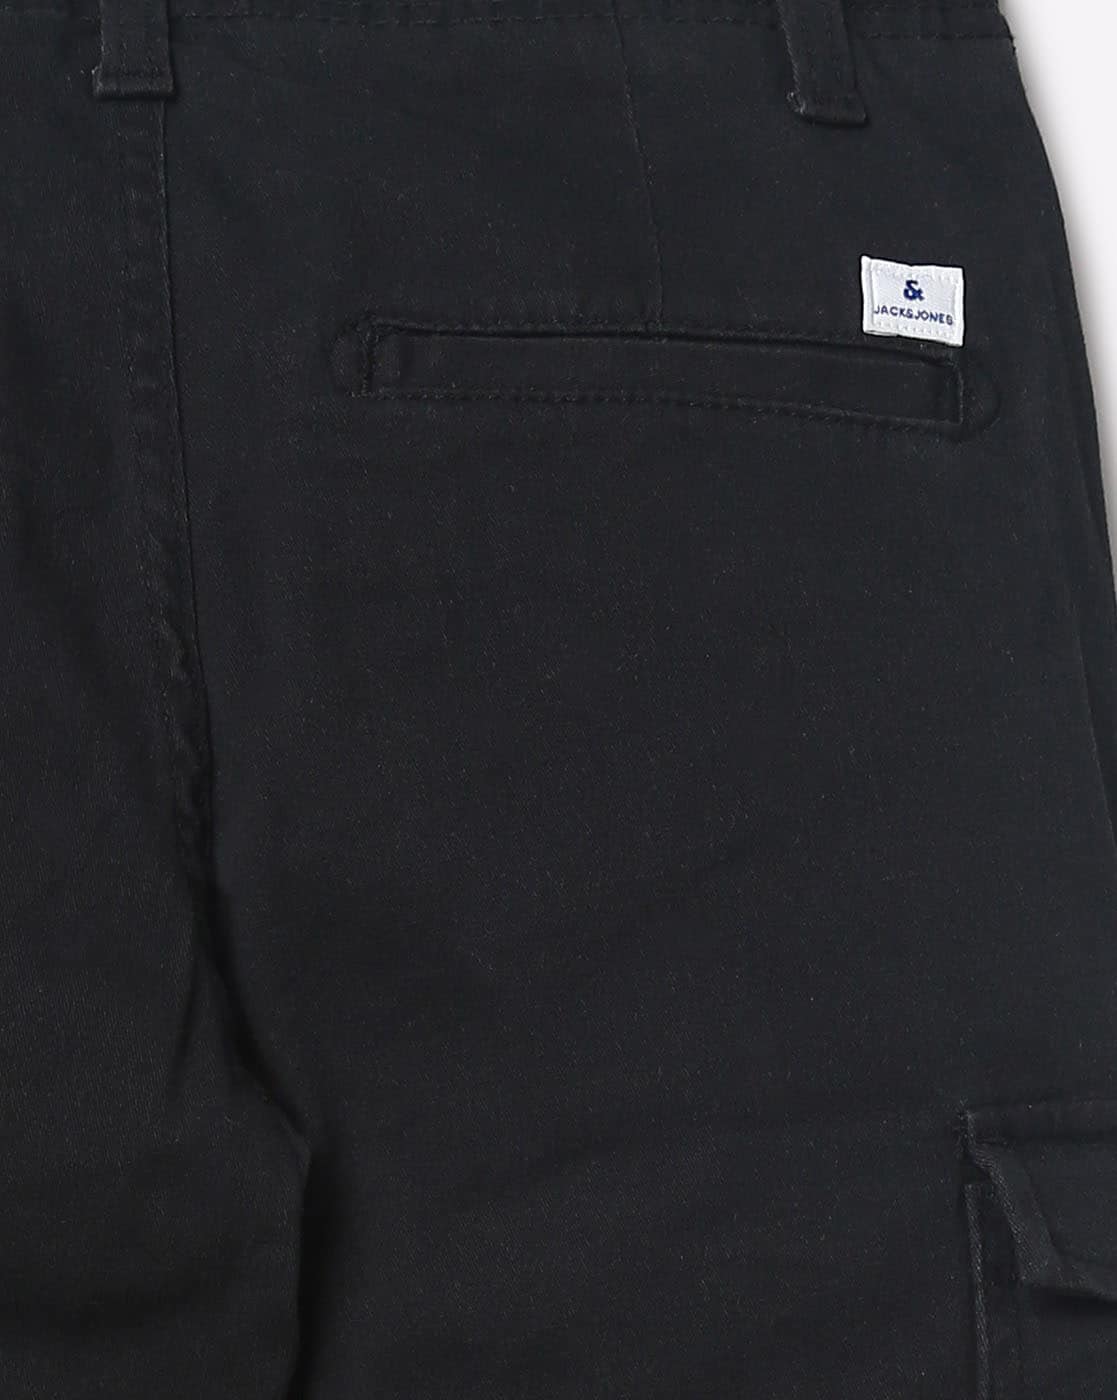 Jack and Jones Intelligence cuffed cargo pants in black  ShopStyle